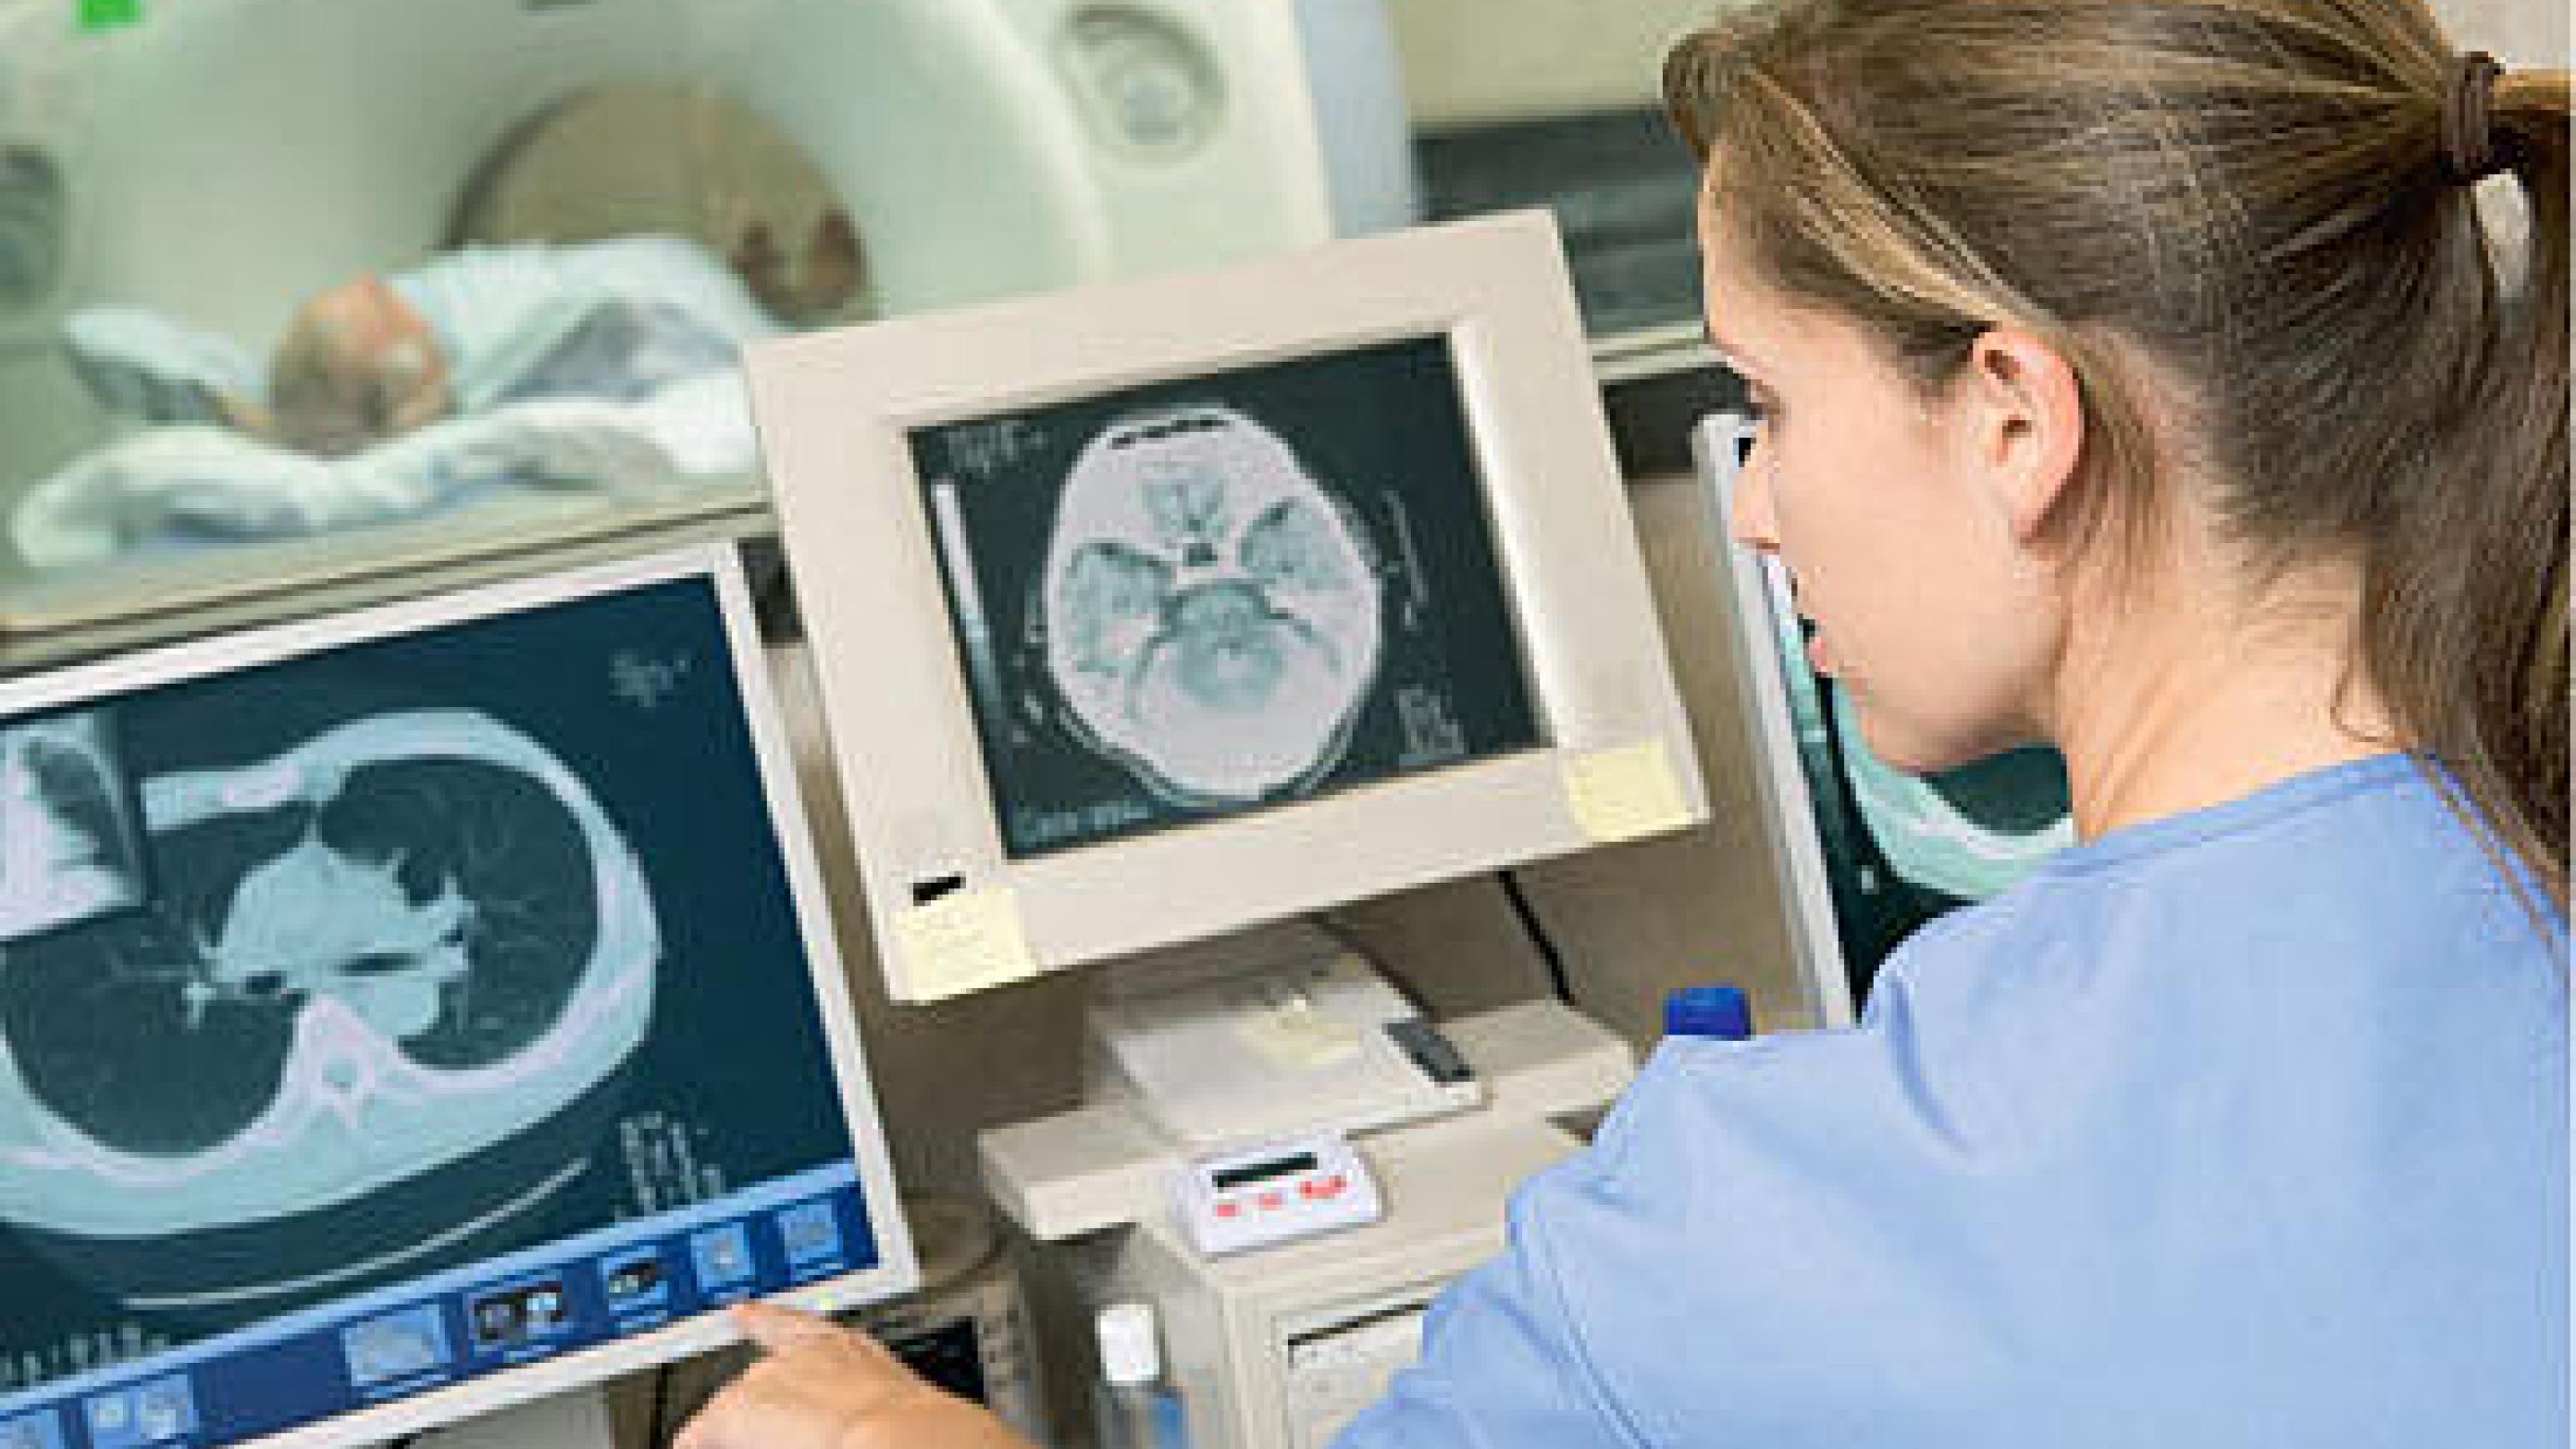 Straight-to-test computed tomography from primary care to fast-track reduces chest-physician time.